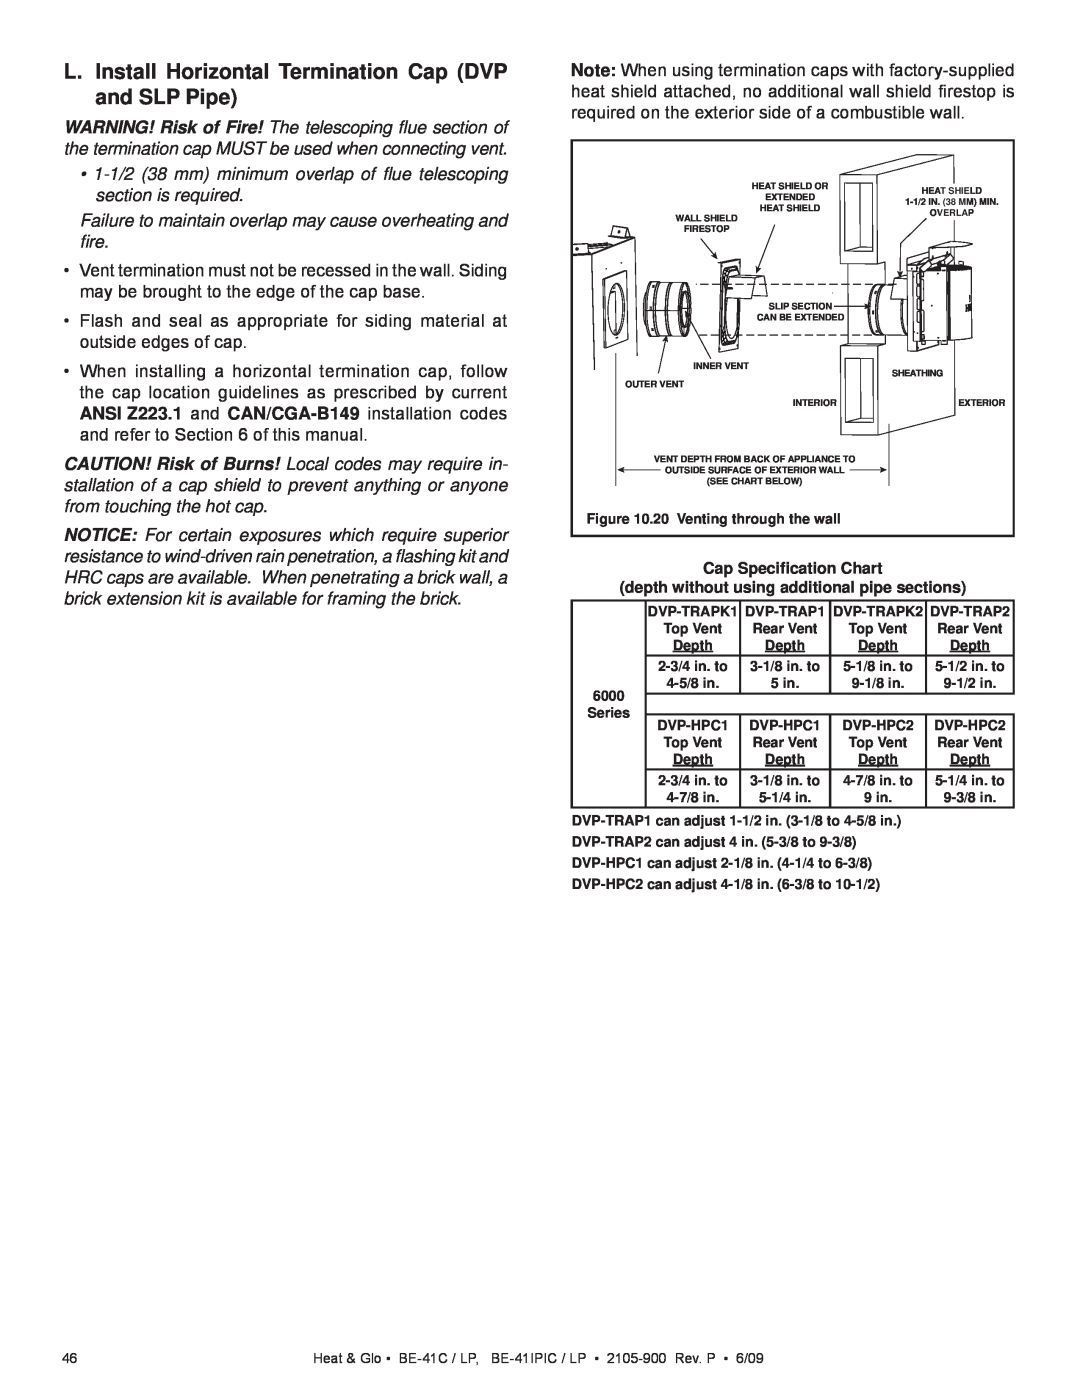 Heat & Glo LifeStyle BE-41LPC, BE-41C ANSI Z223.1 and CAN/CGA-B149 installation codes, and refer to of this manual 